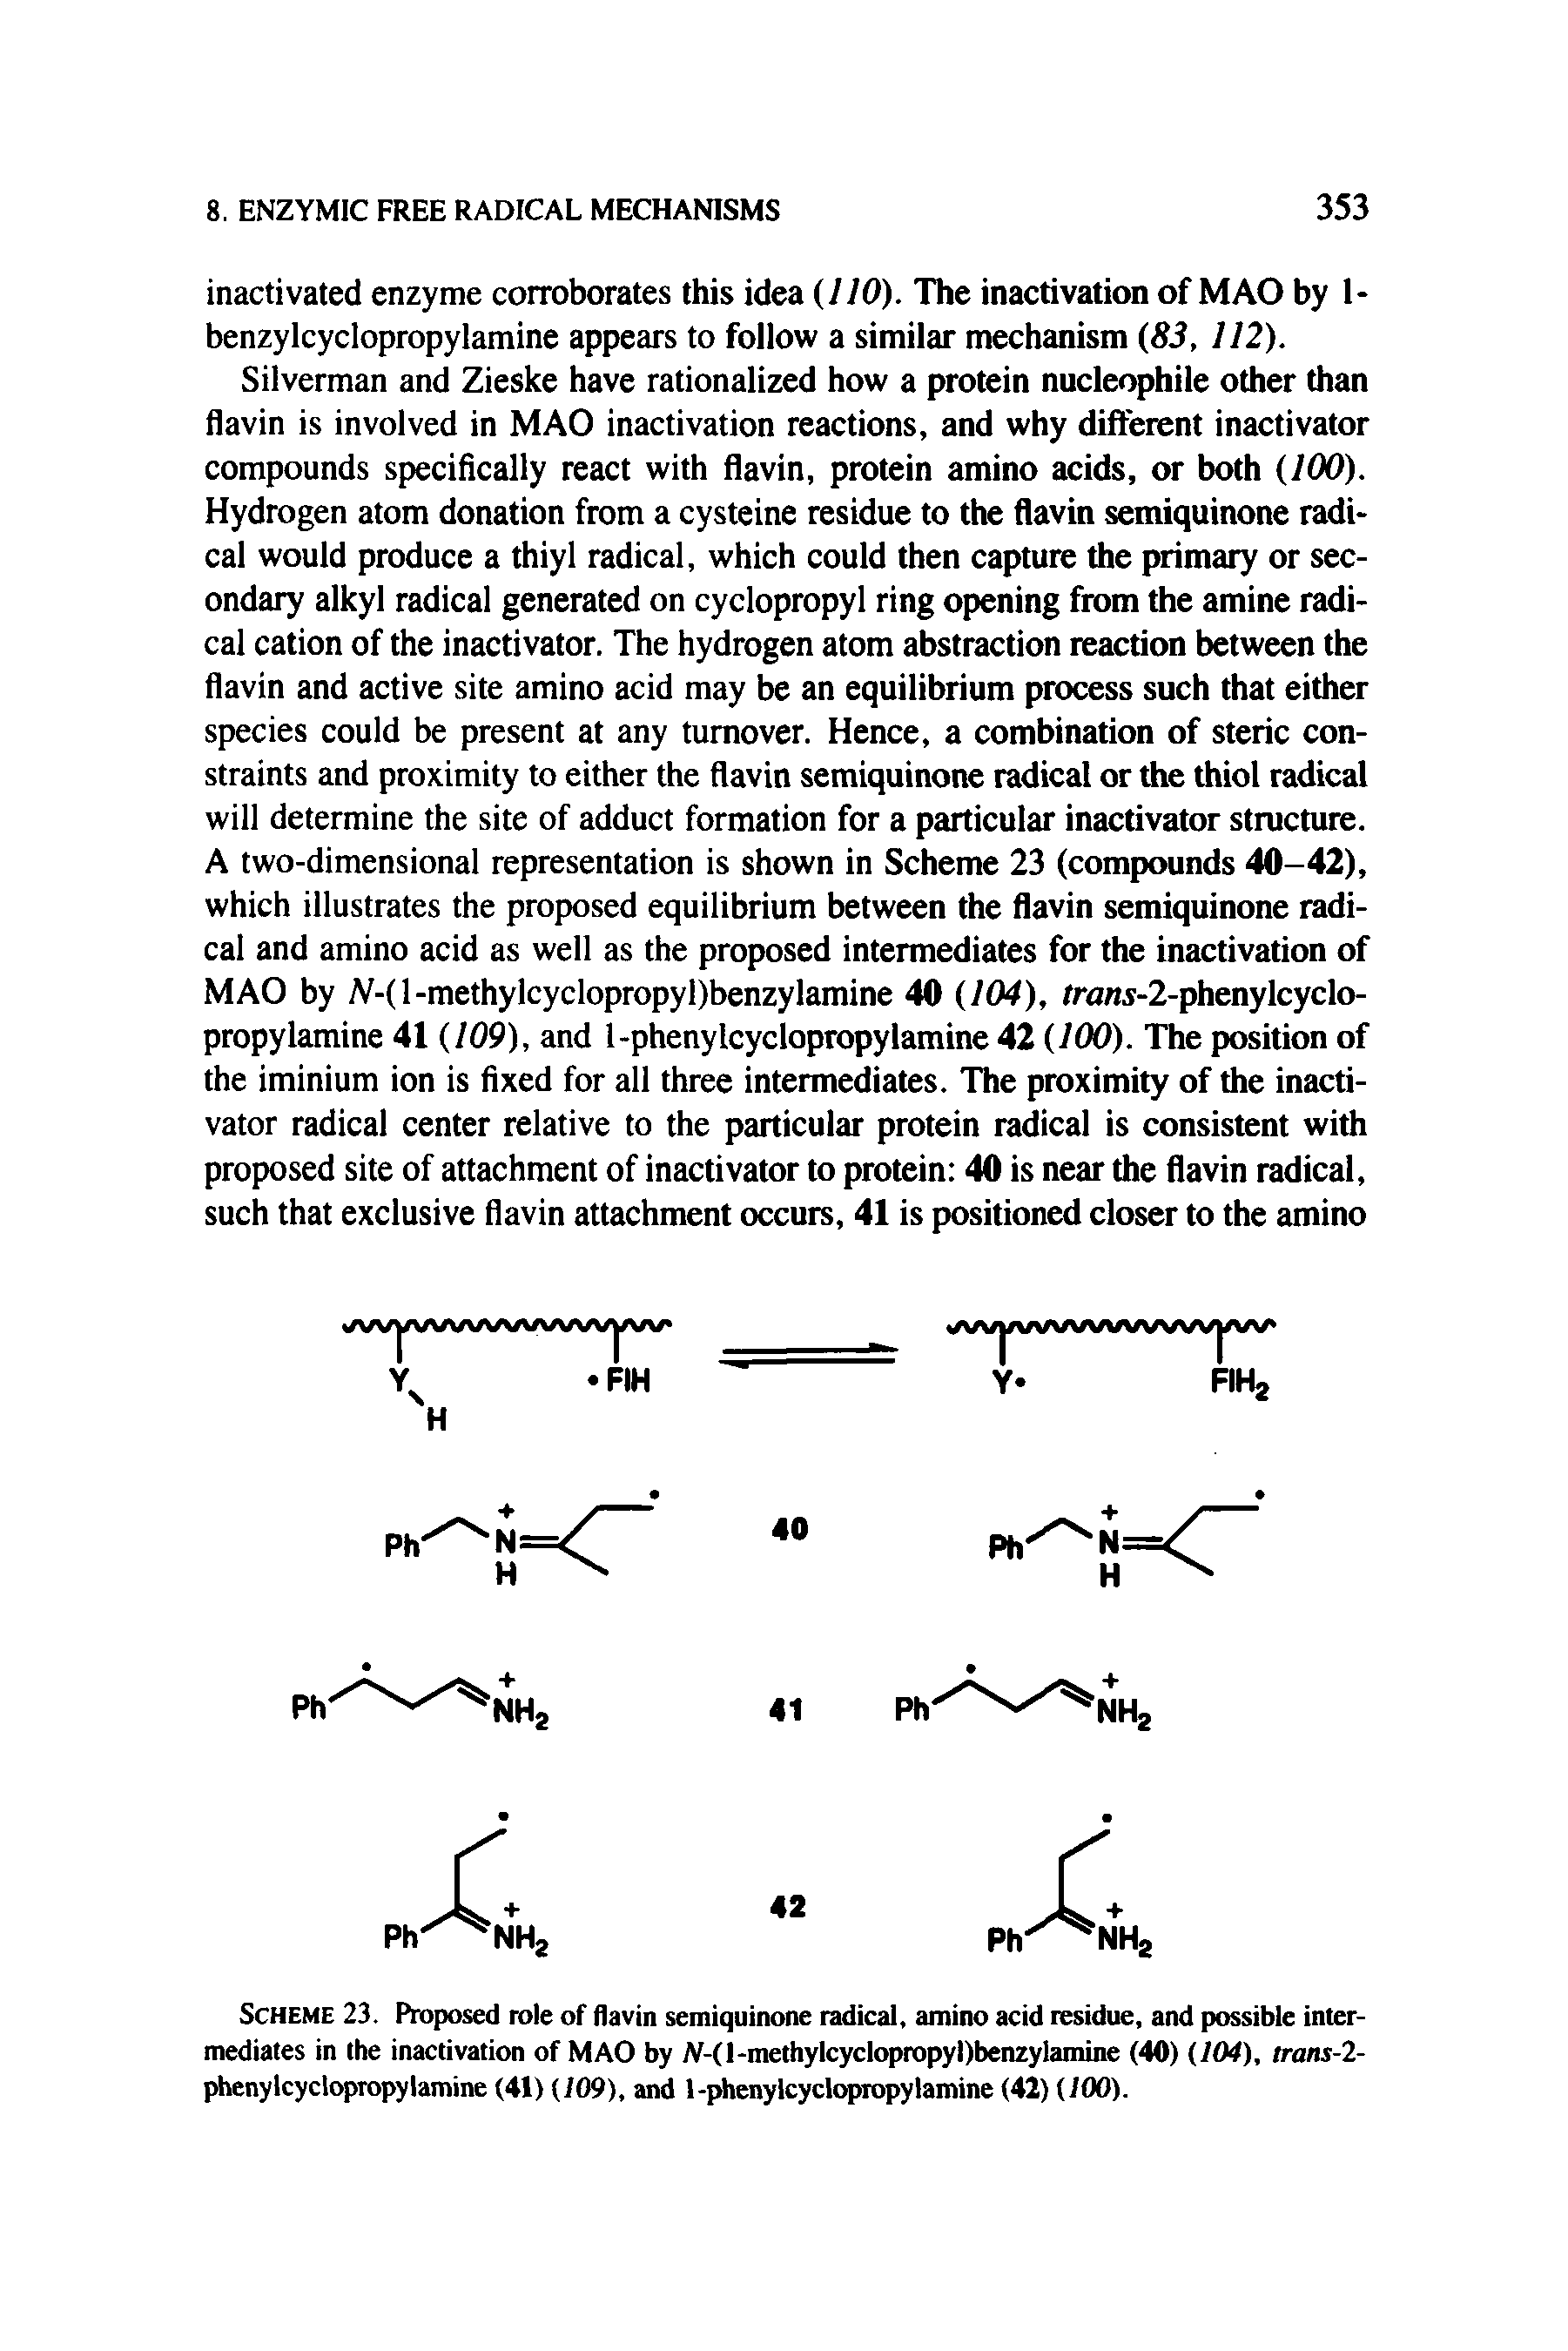 Scheme 23. Proposed role of flavin semiquinone radical, amino acid residue, and possible intermediates in the inactivation of MAO by N-(I-methylcyclopropyl)benzylamine (40) (.104), trans-2-phenylcyclopropylamine (41) (i09), and 1-phenylcyclopropylamine (42) (JOO).